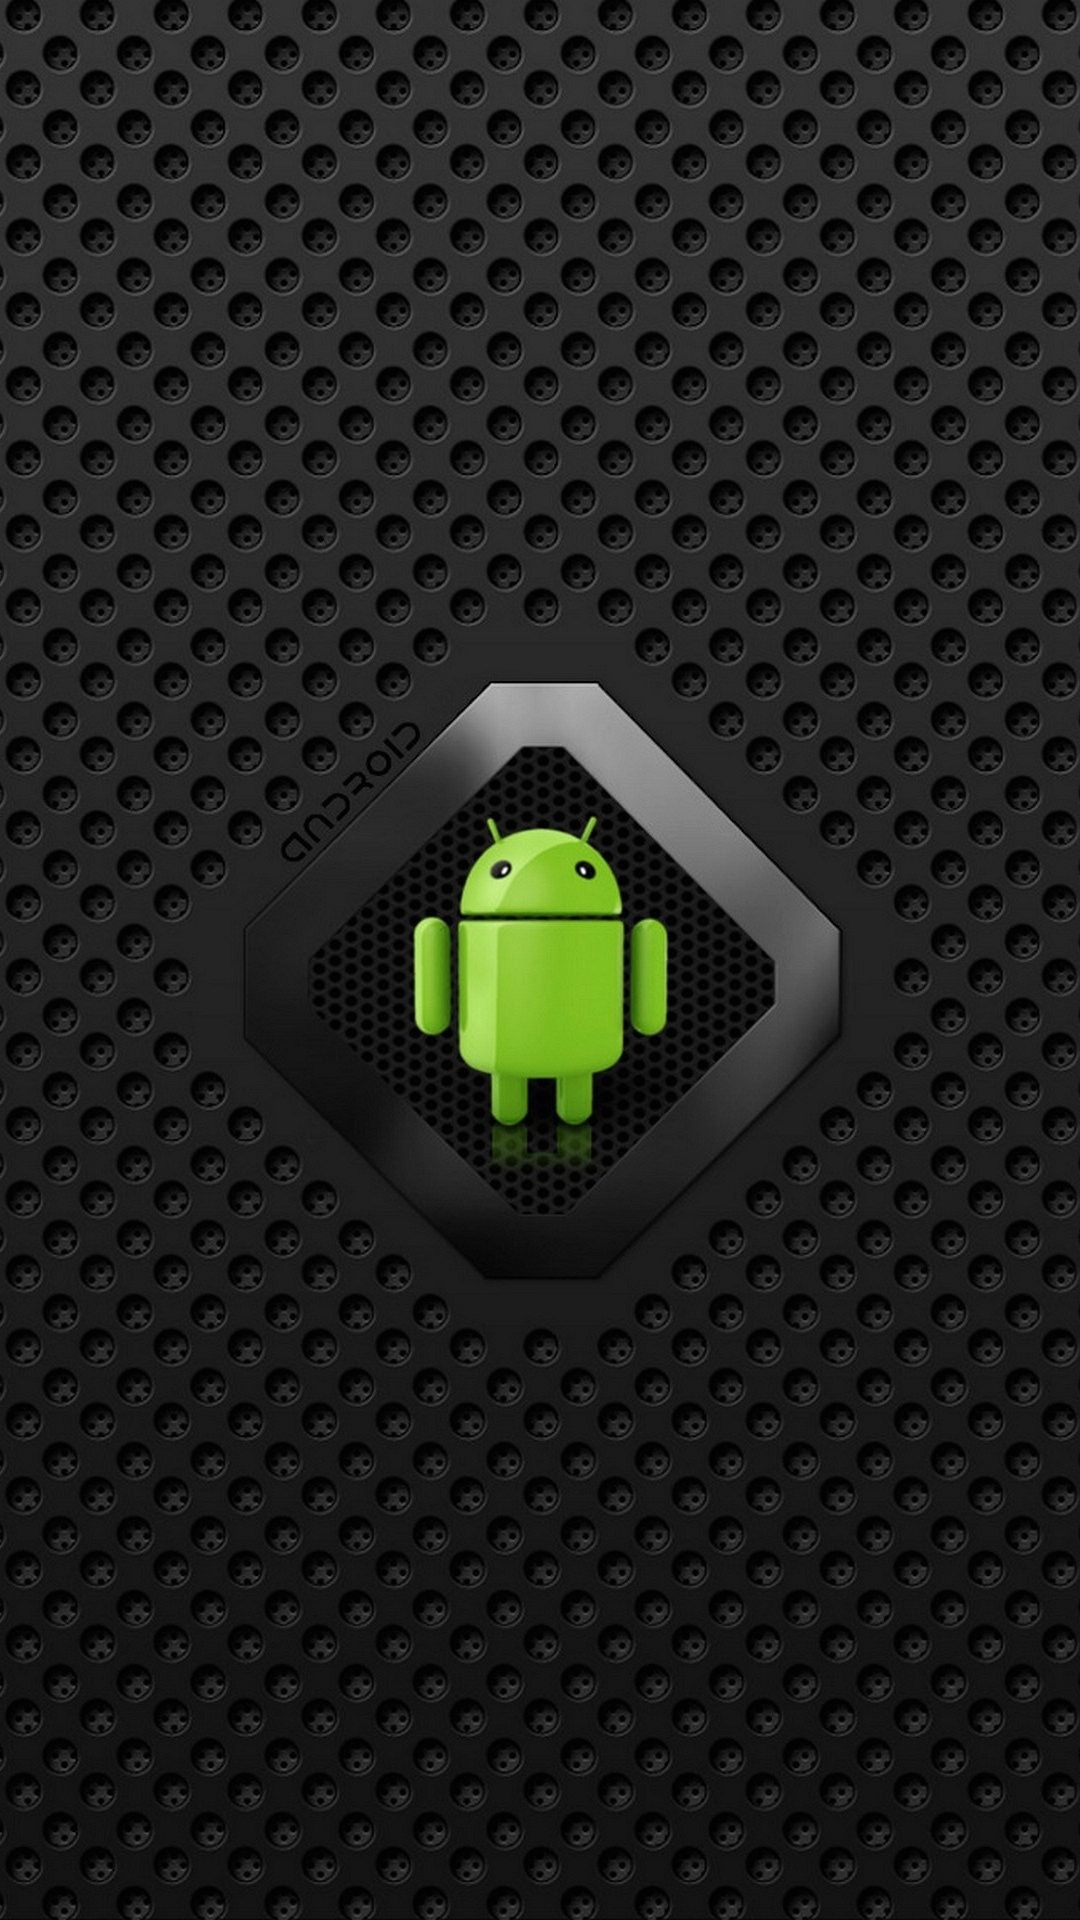 1080x1920 cool wallpapers for android phone #5680